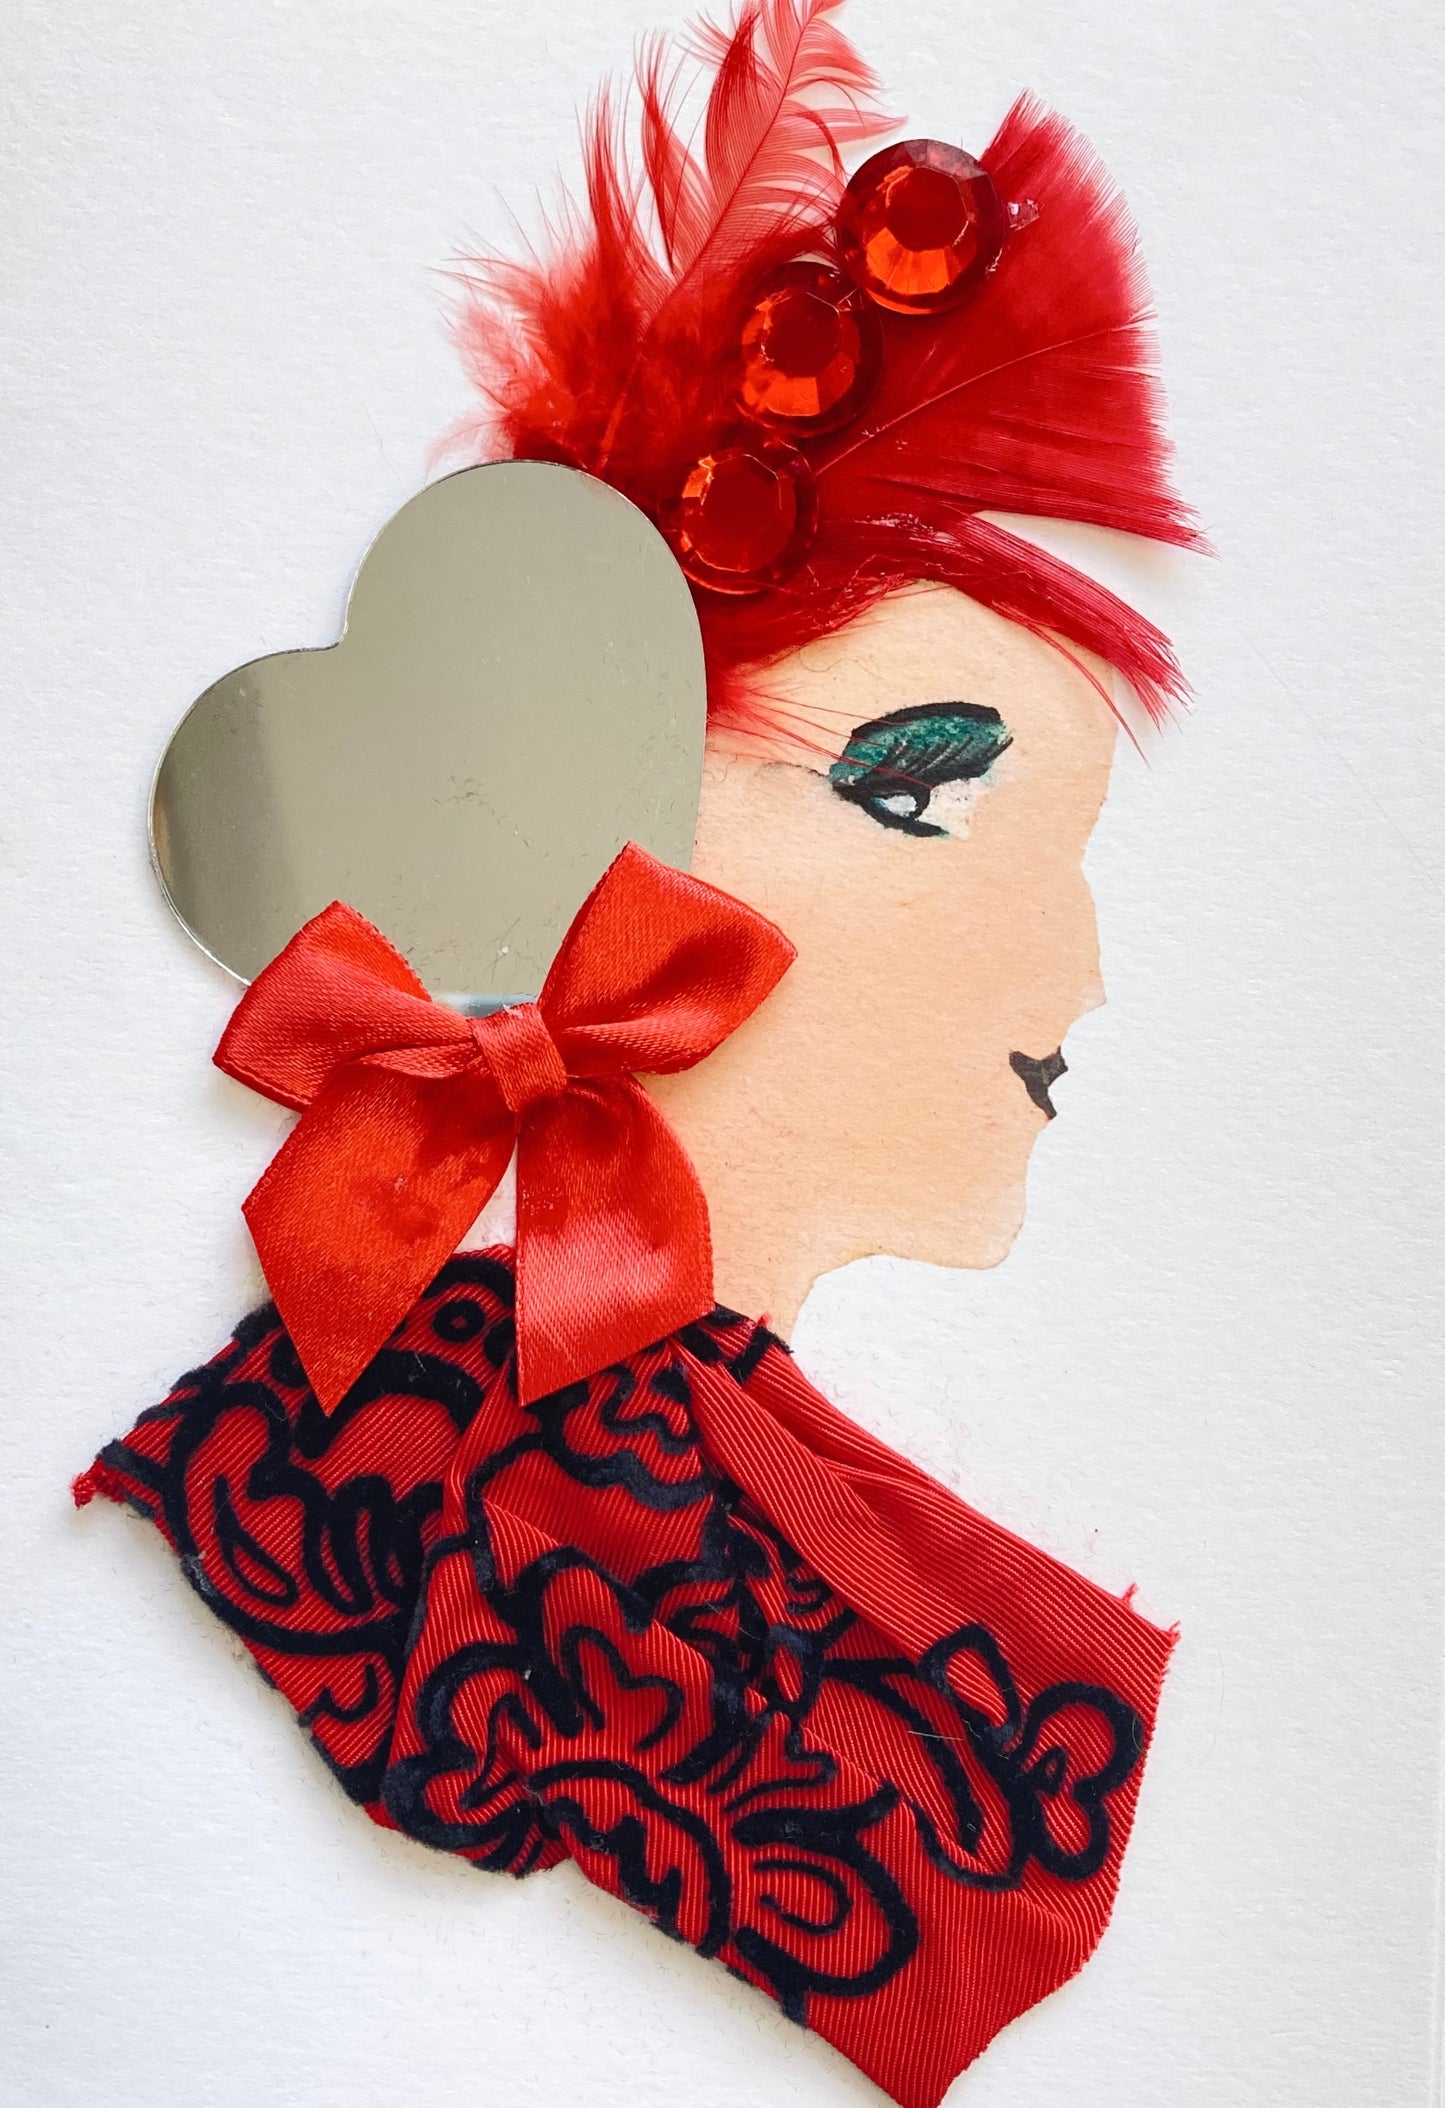 I designed this card of a woman named Camden Apple Chef. She has a white skin tone and has red feather hair and a mirrored heart barrette. She wears a red dress with a black floral print on it and a bow at the neckline.